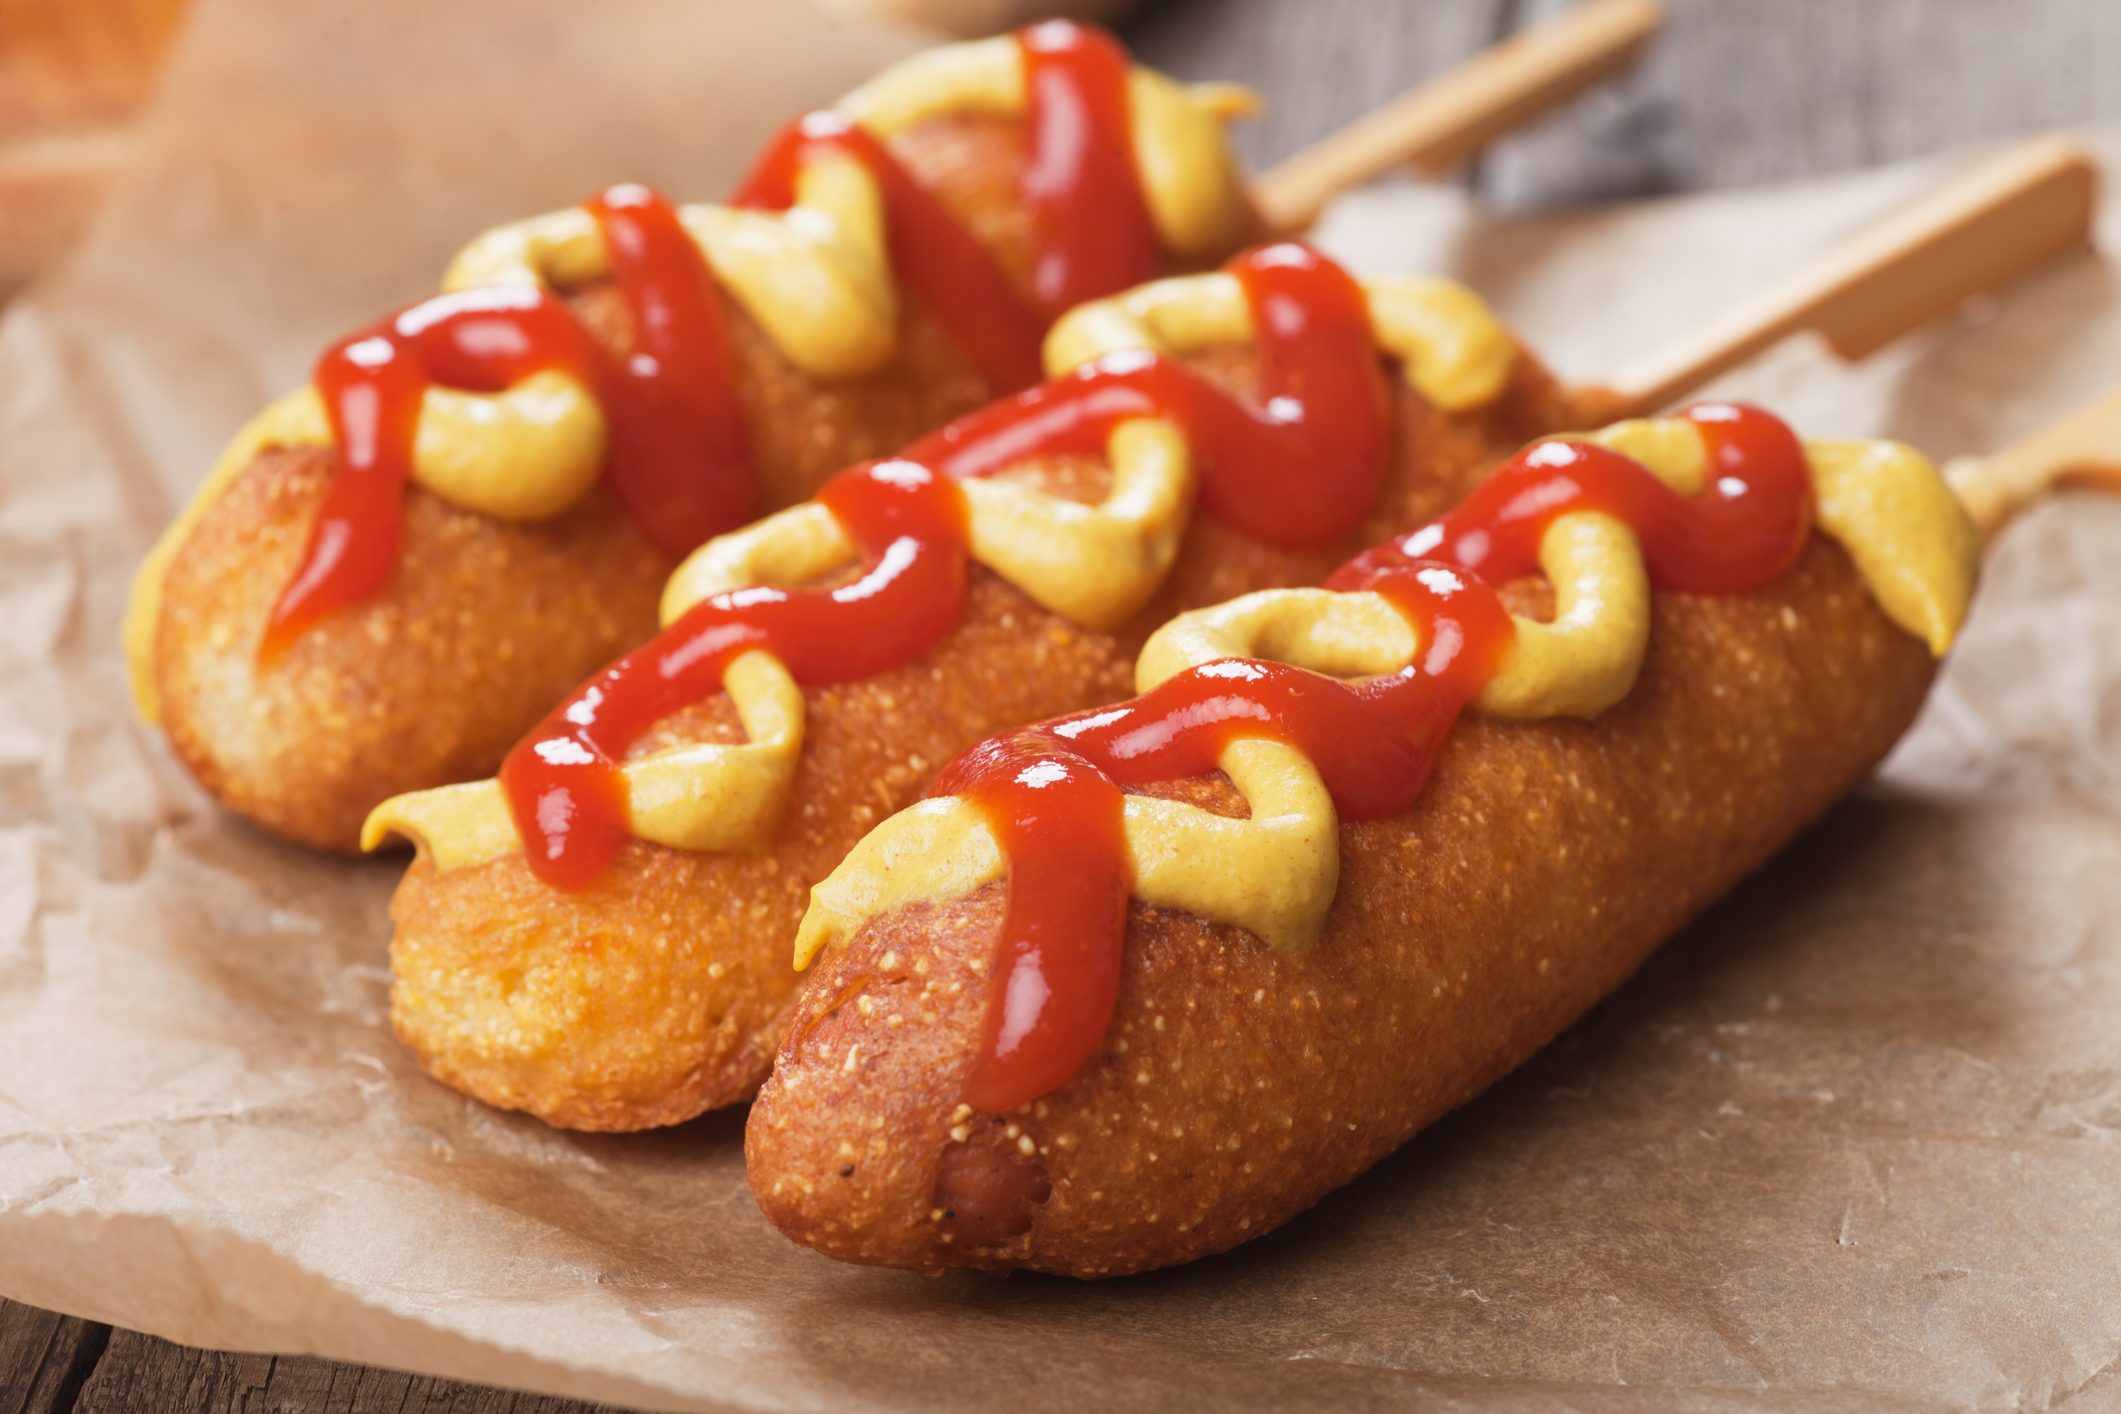 Three corn dogs with mustard and ketchup drizzled on top, displayed on parchment paper